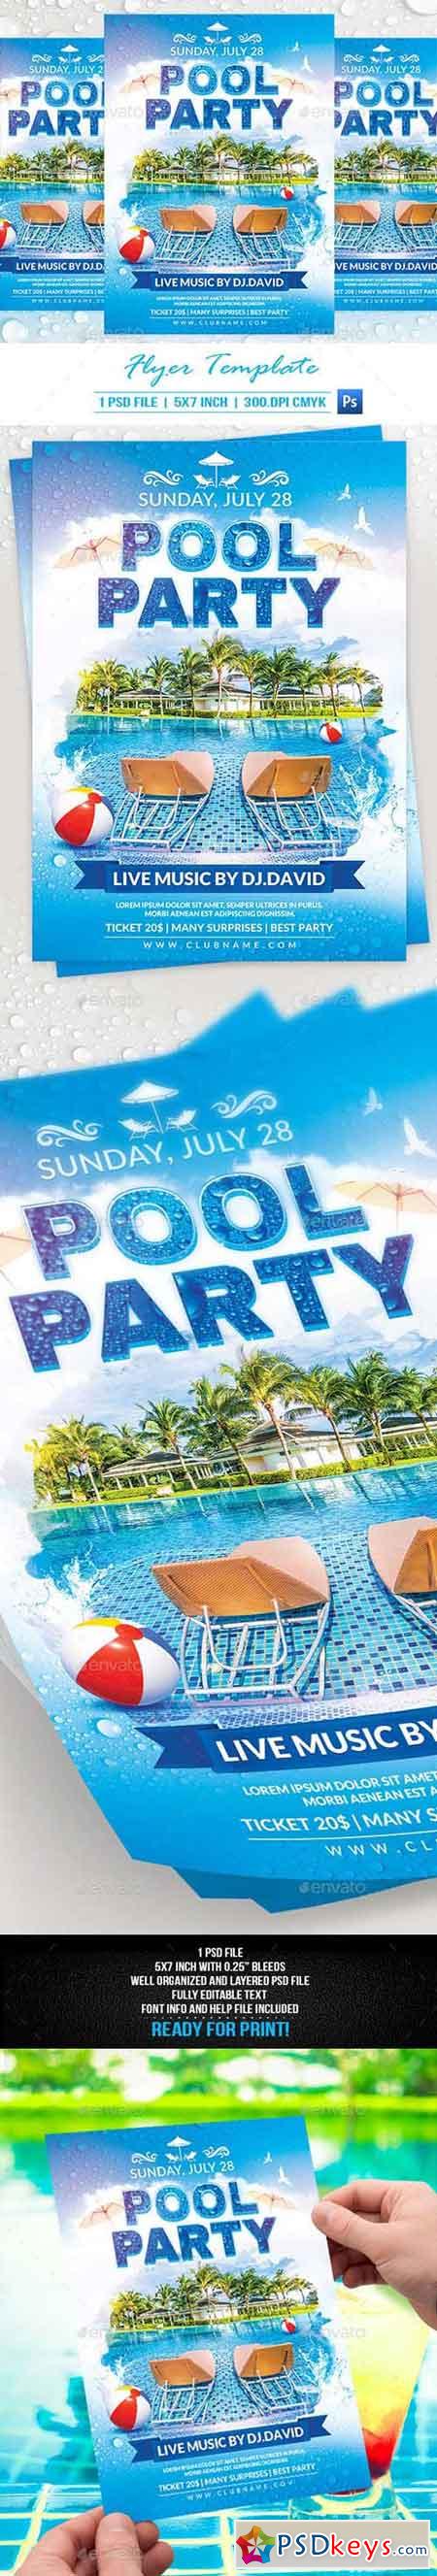 Pool Party Flyer Template 19967044